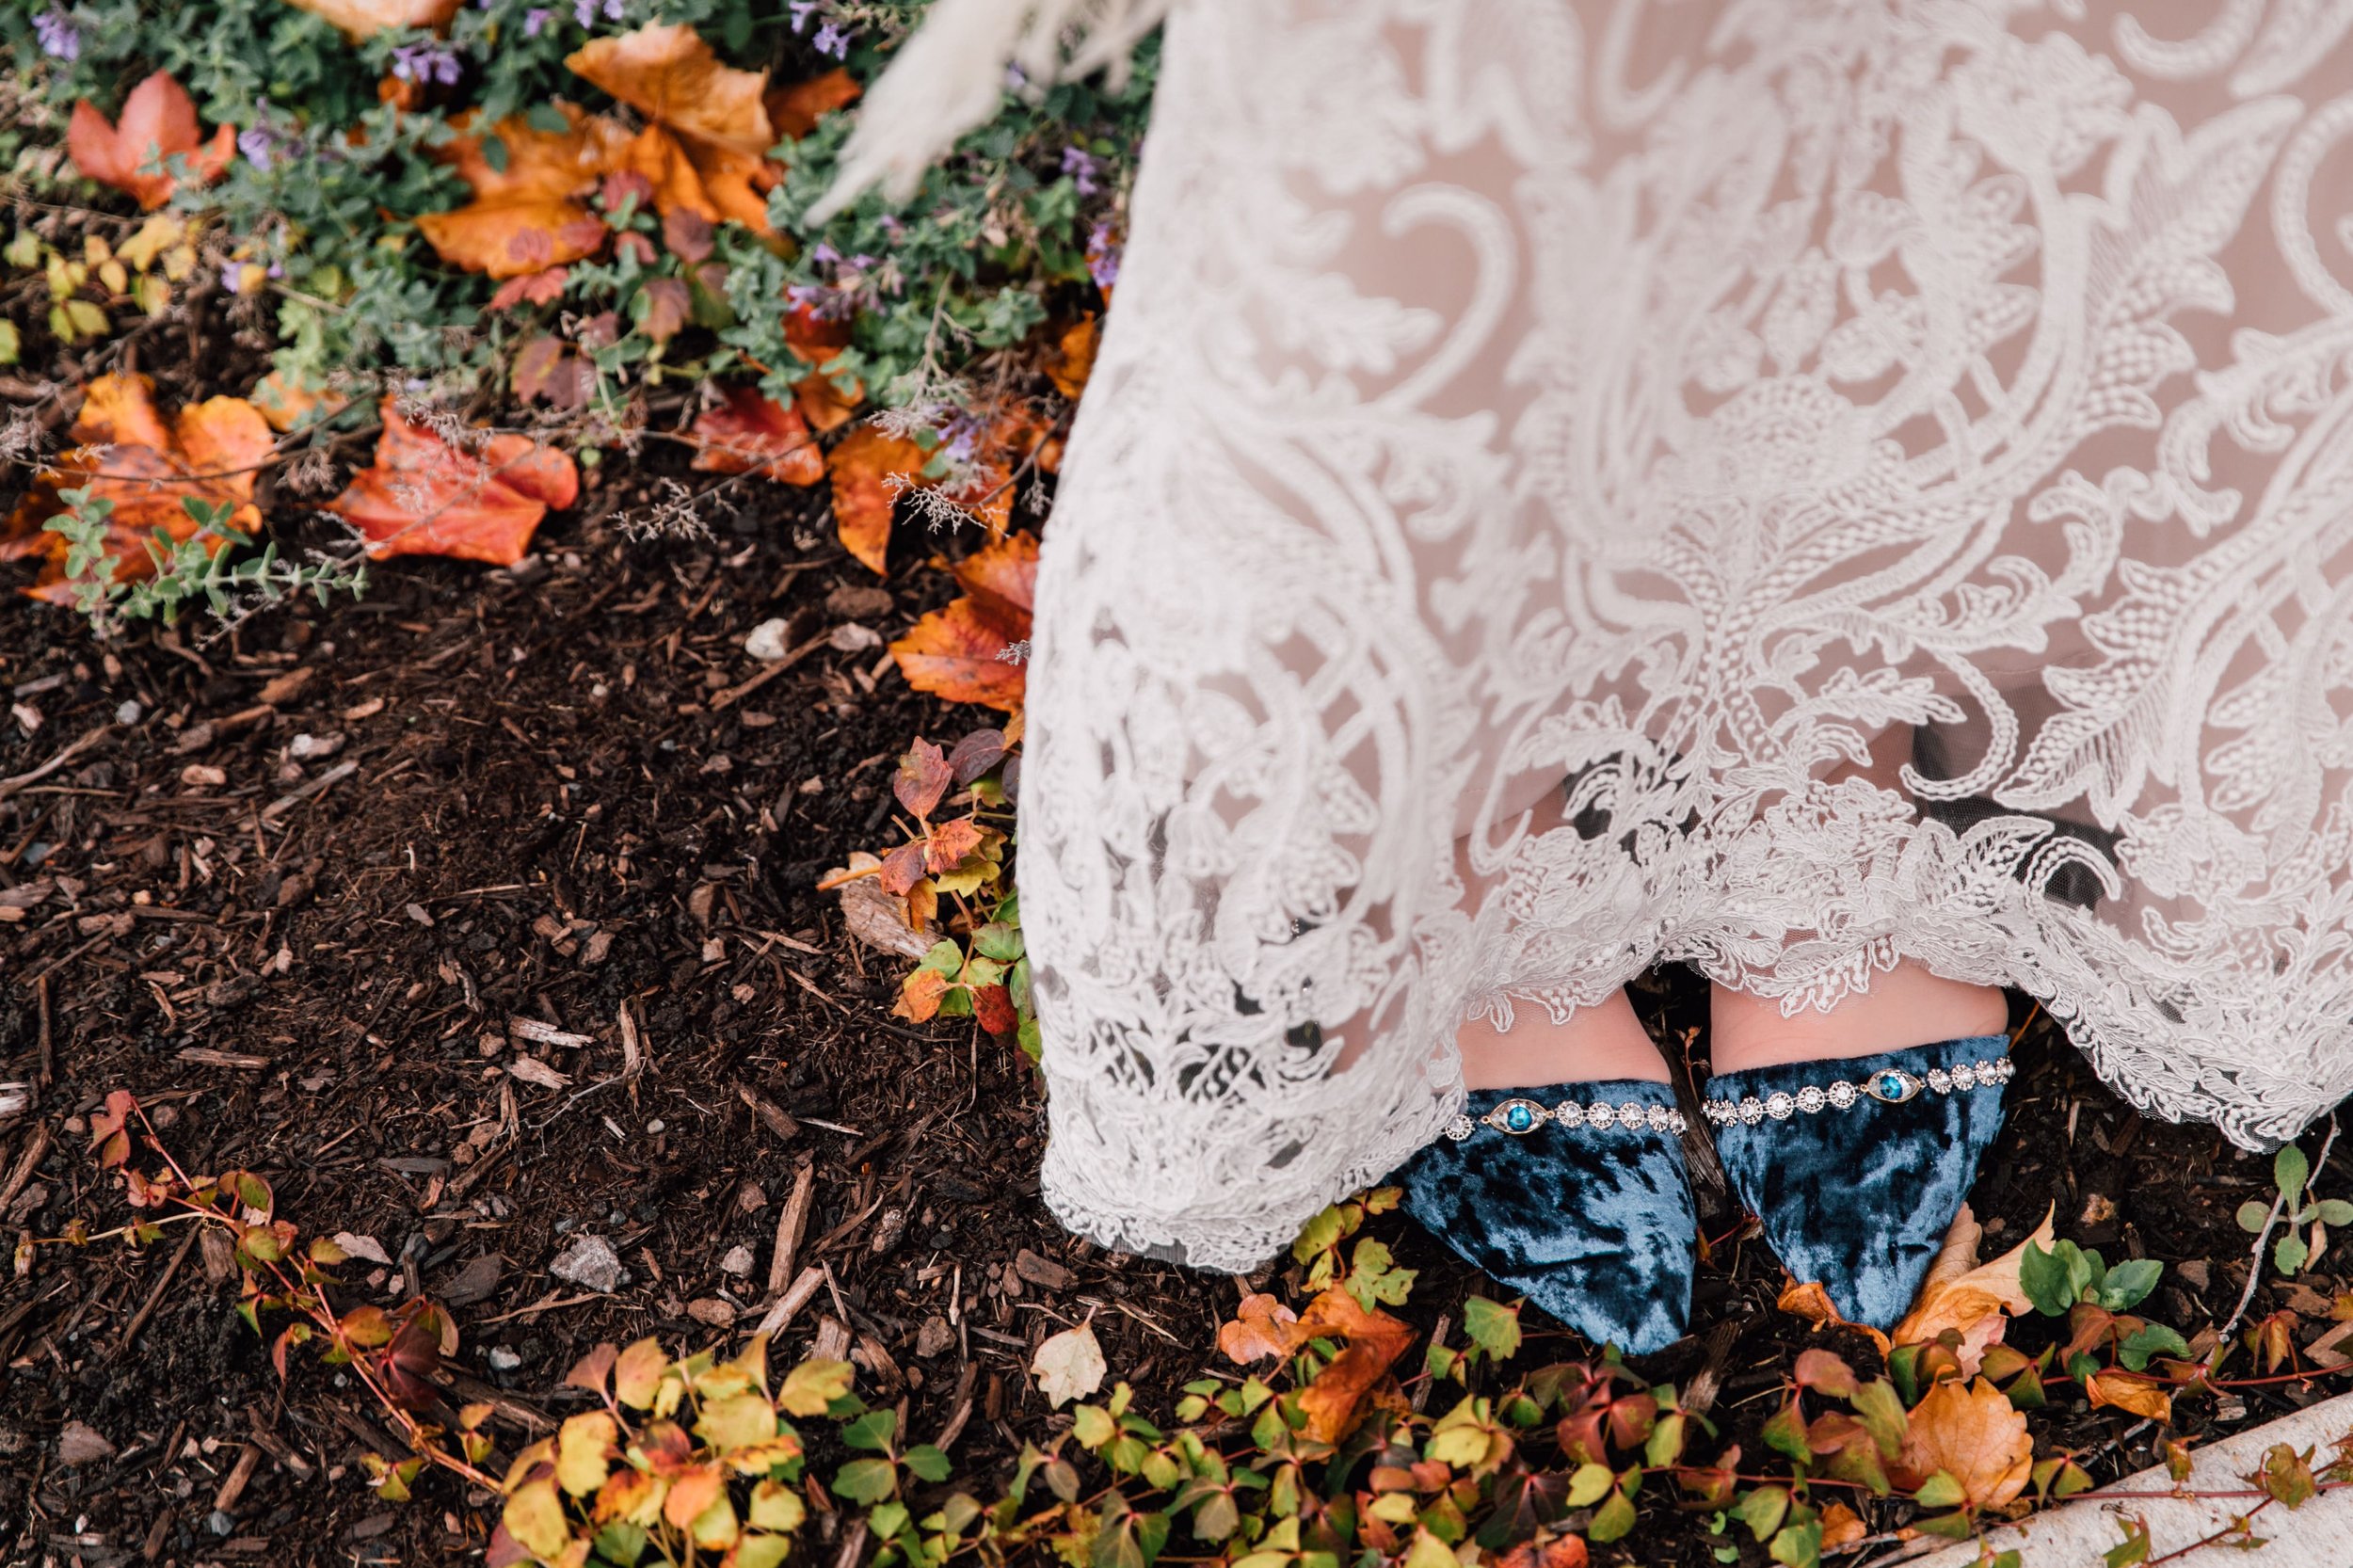  a detail shot captured by syracuse wedding photographer, the bride stands among fall leaves wearing blue velvet shoes with an eye detail. this closeup photo of her wedding shoes is special to them as they are scientists! 